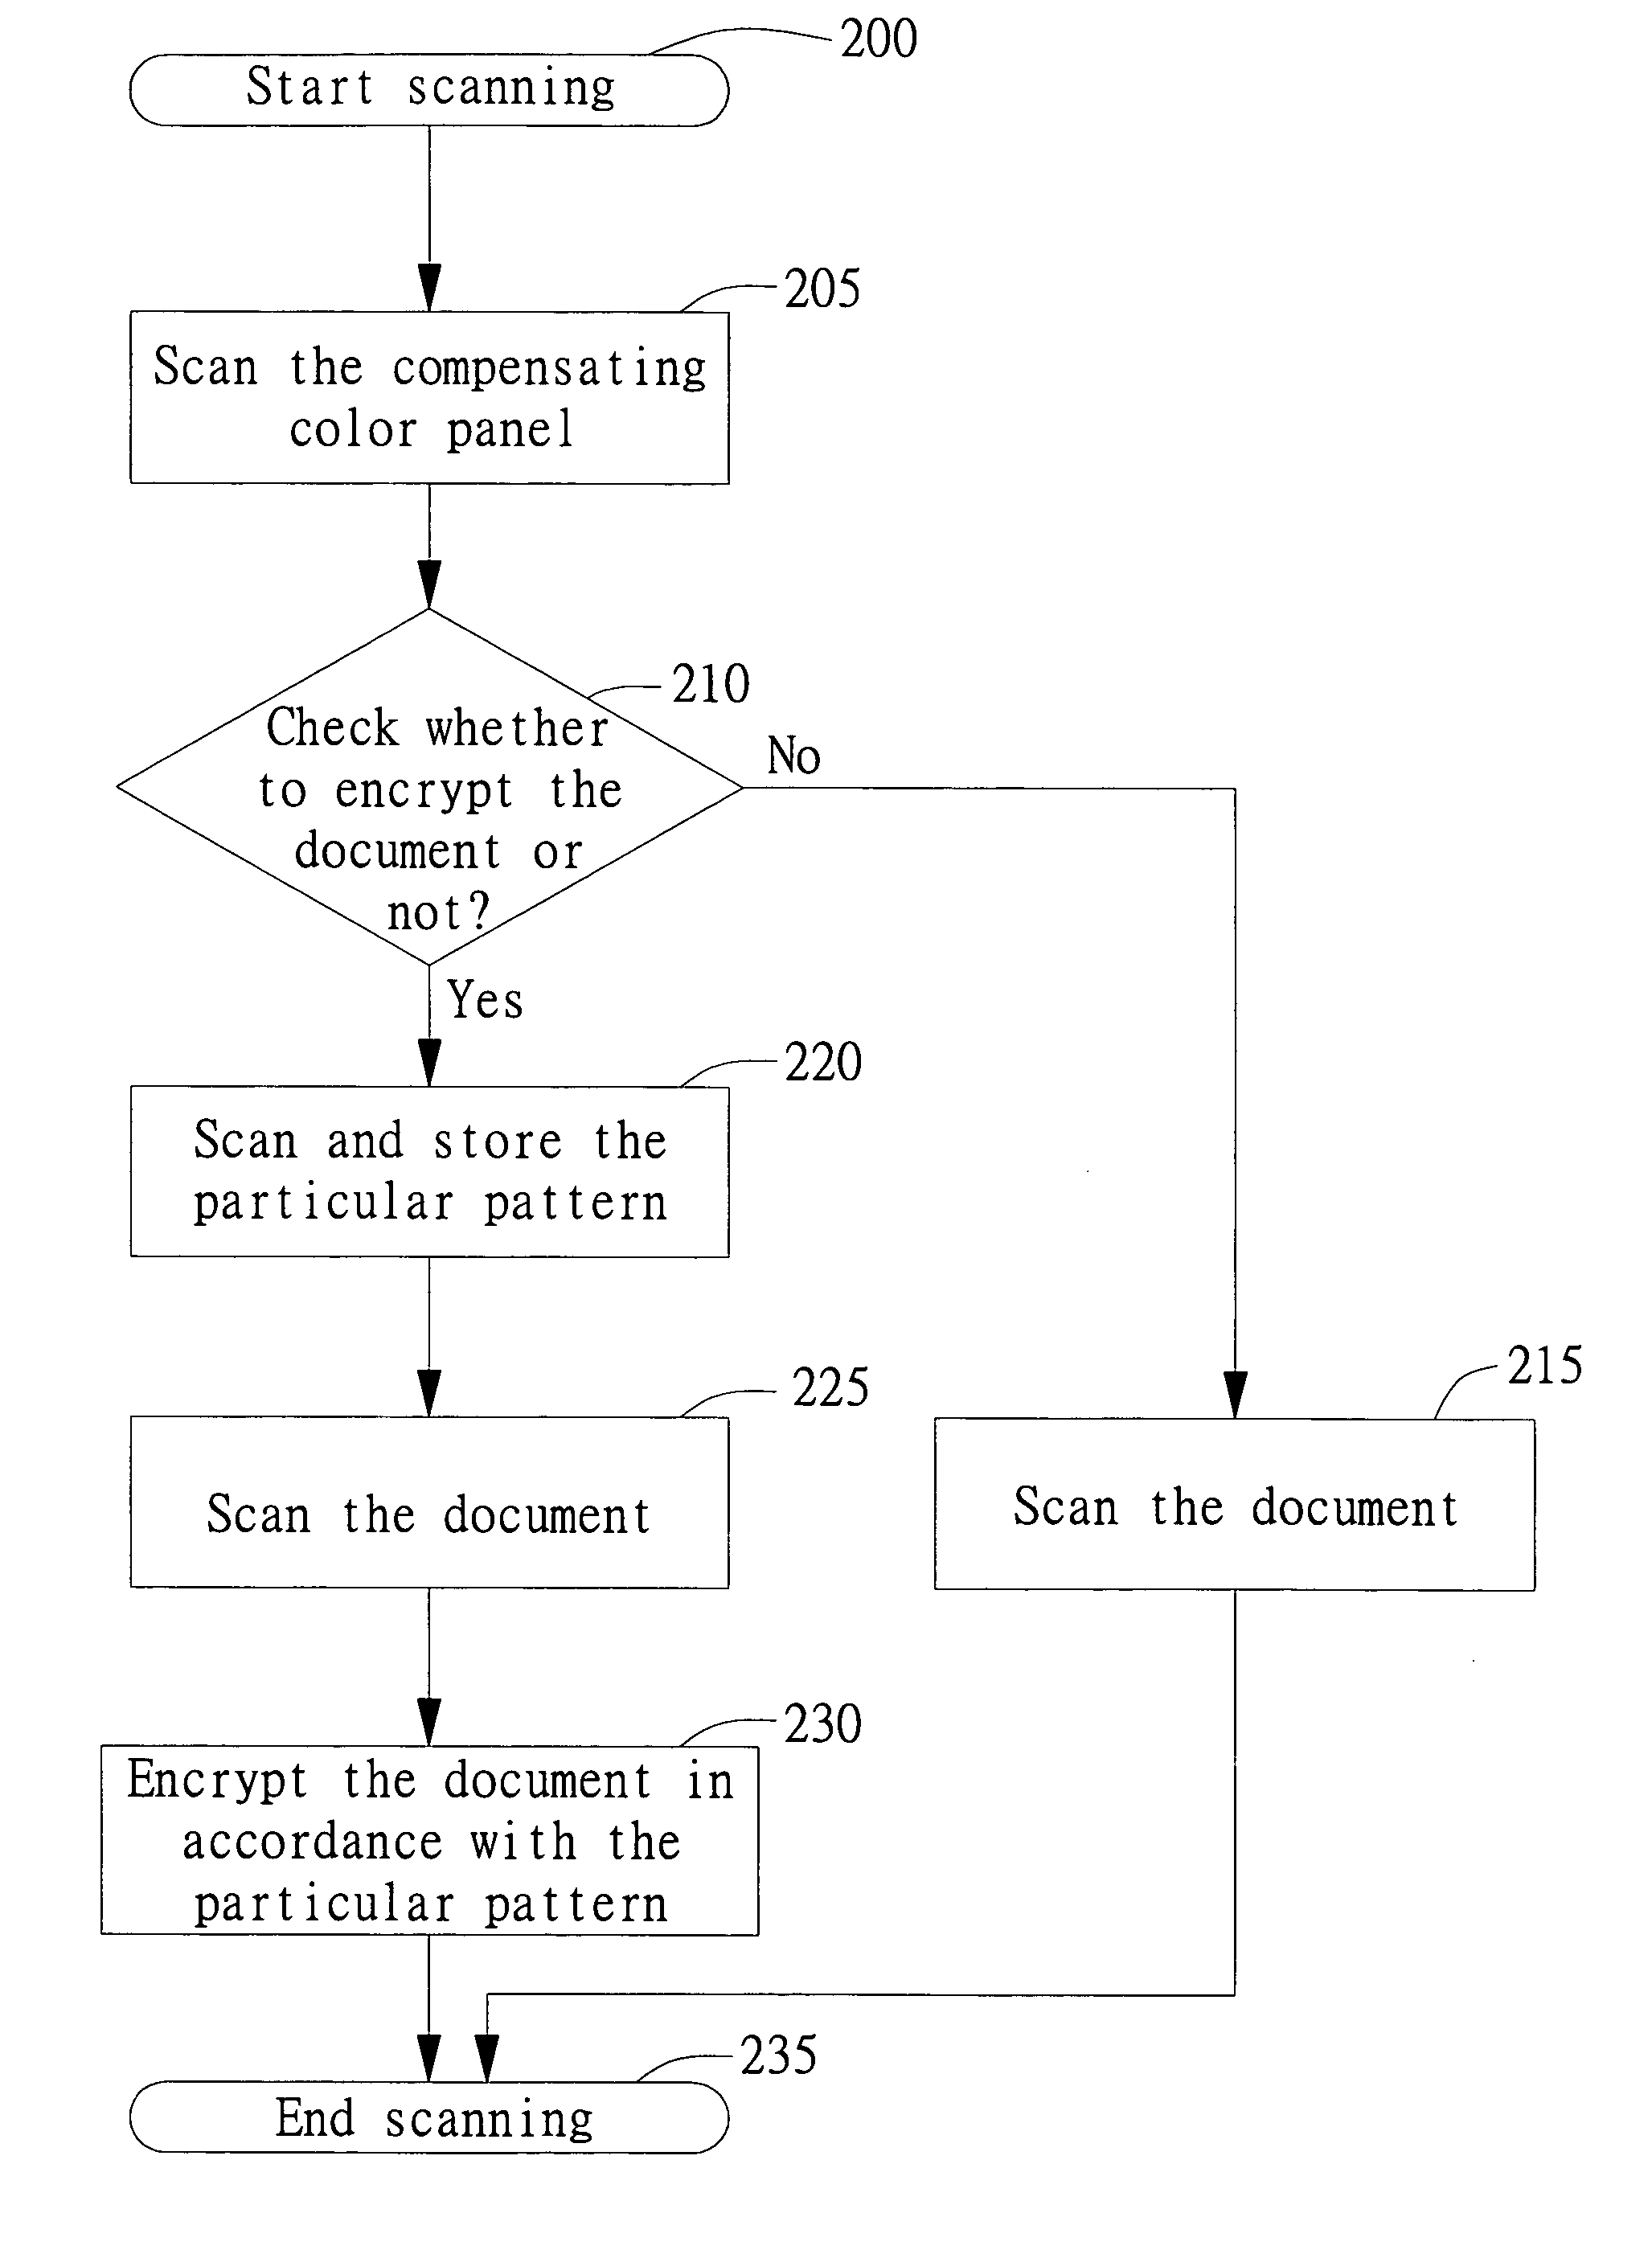 Scanner and method for encrypting/decrypting documents by using the scanner